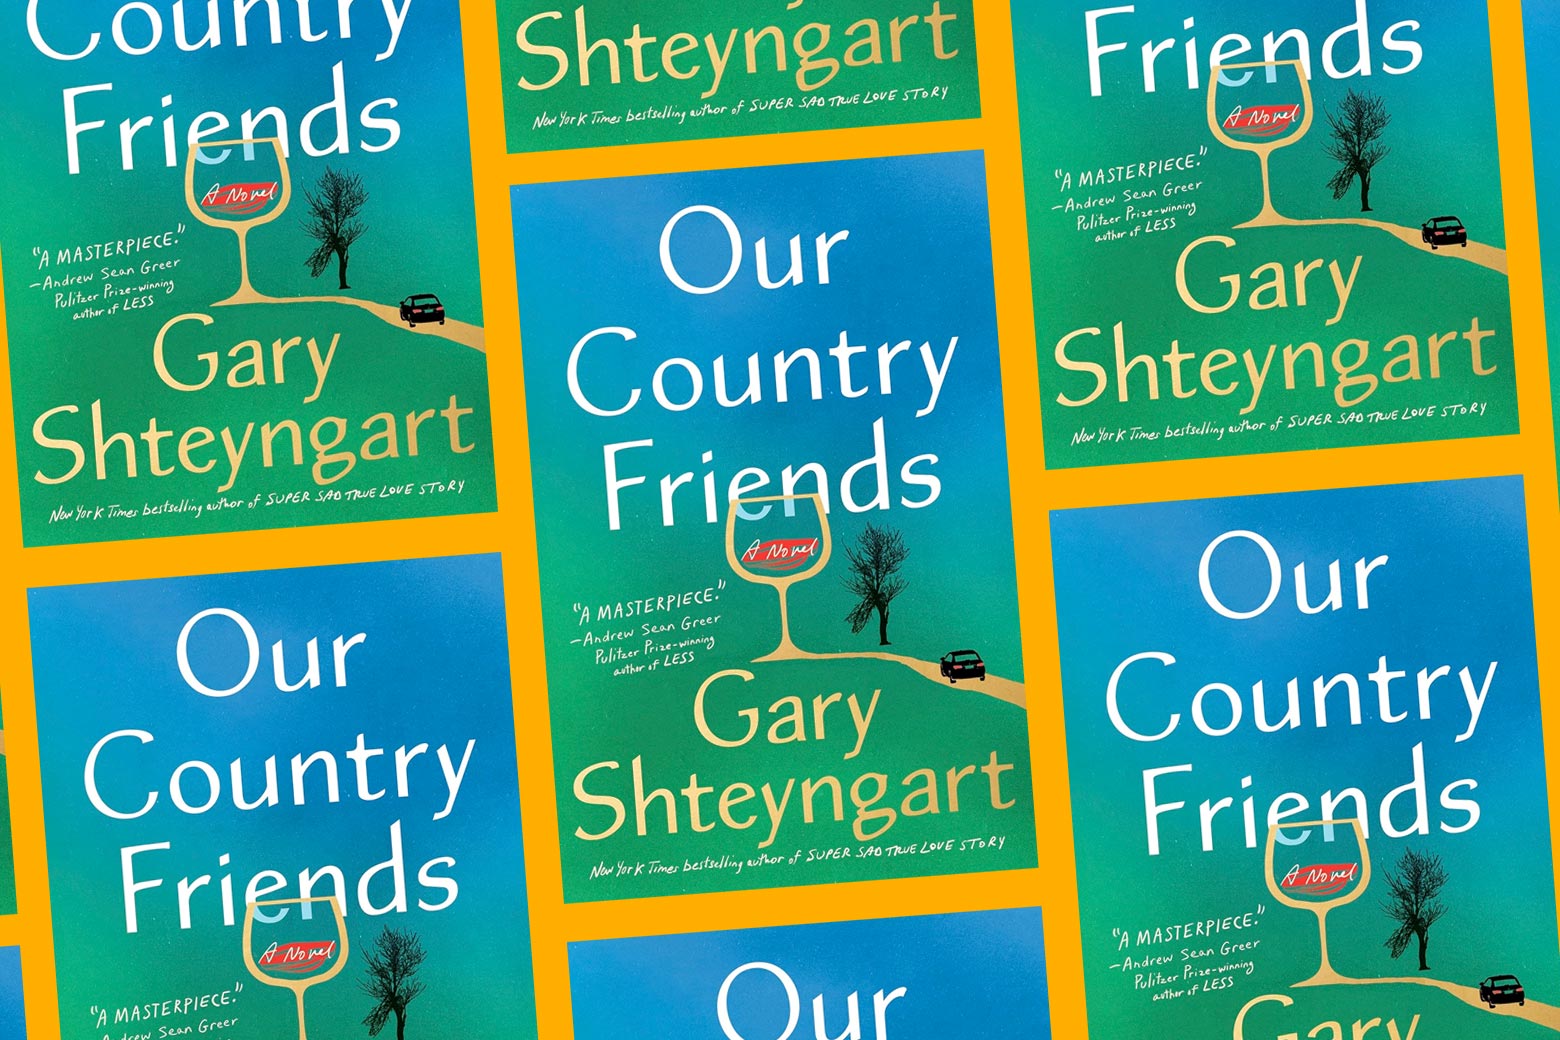 A repeating pattern of the cover of the book Our Country Friends.